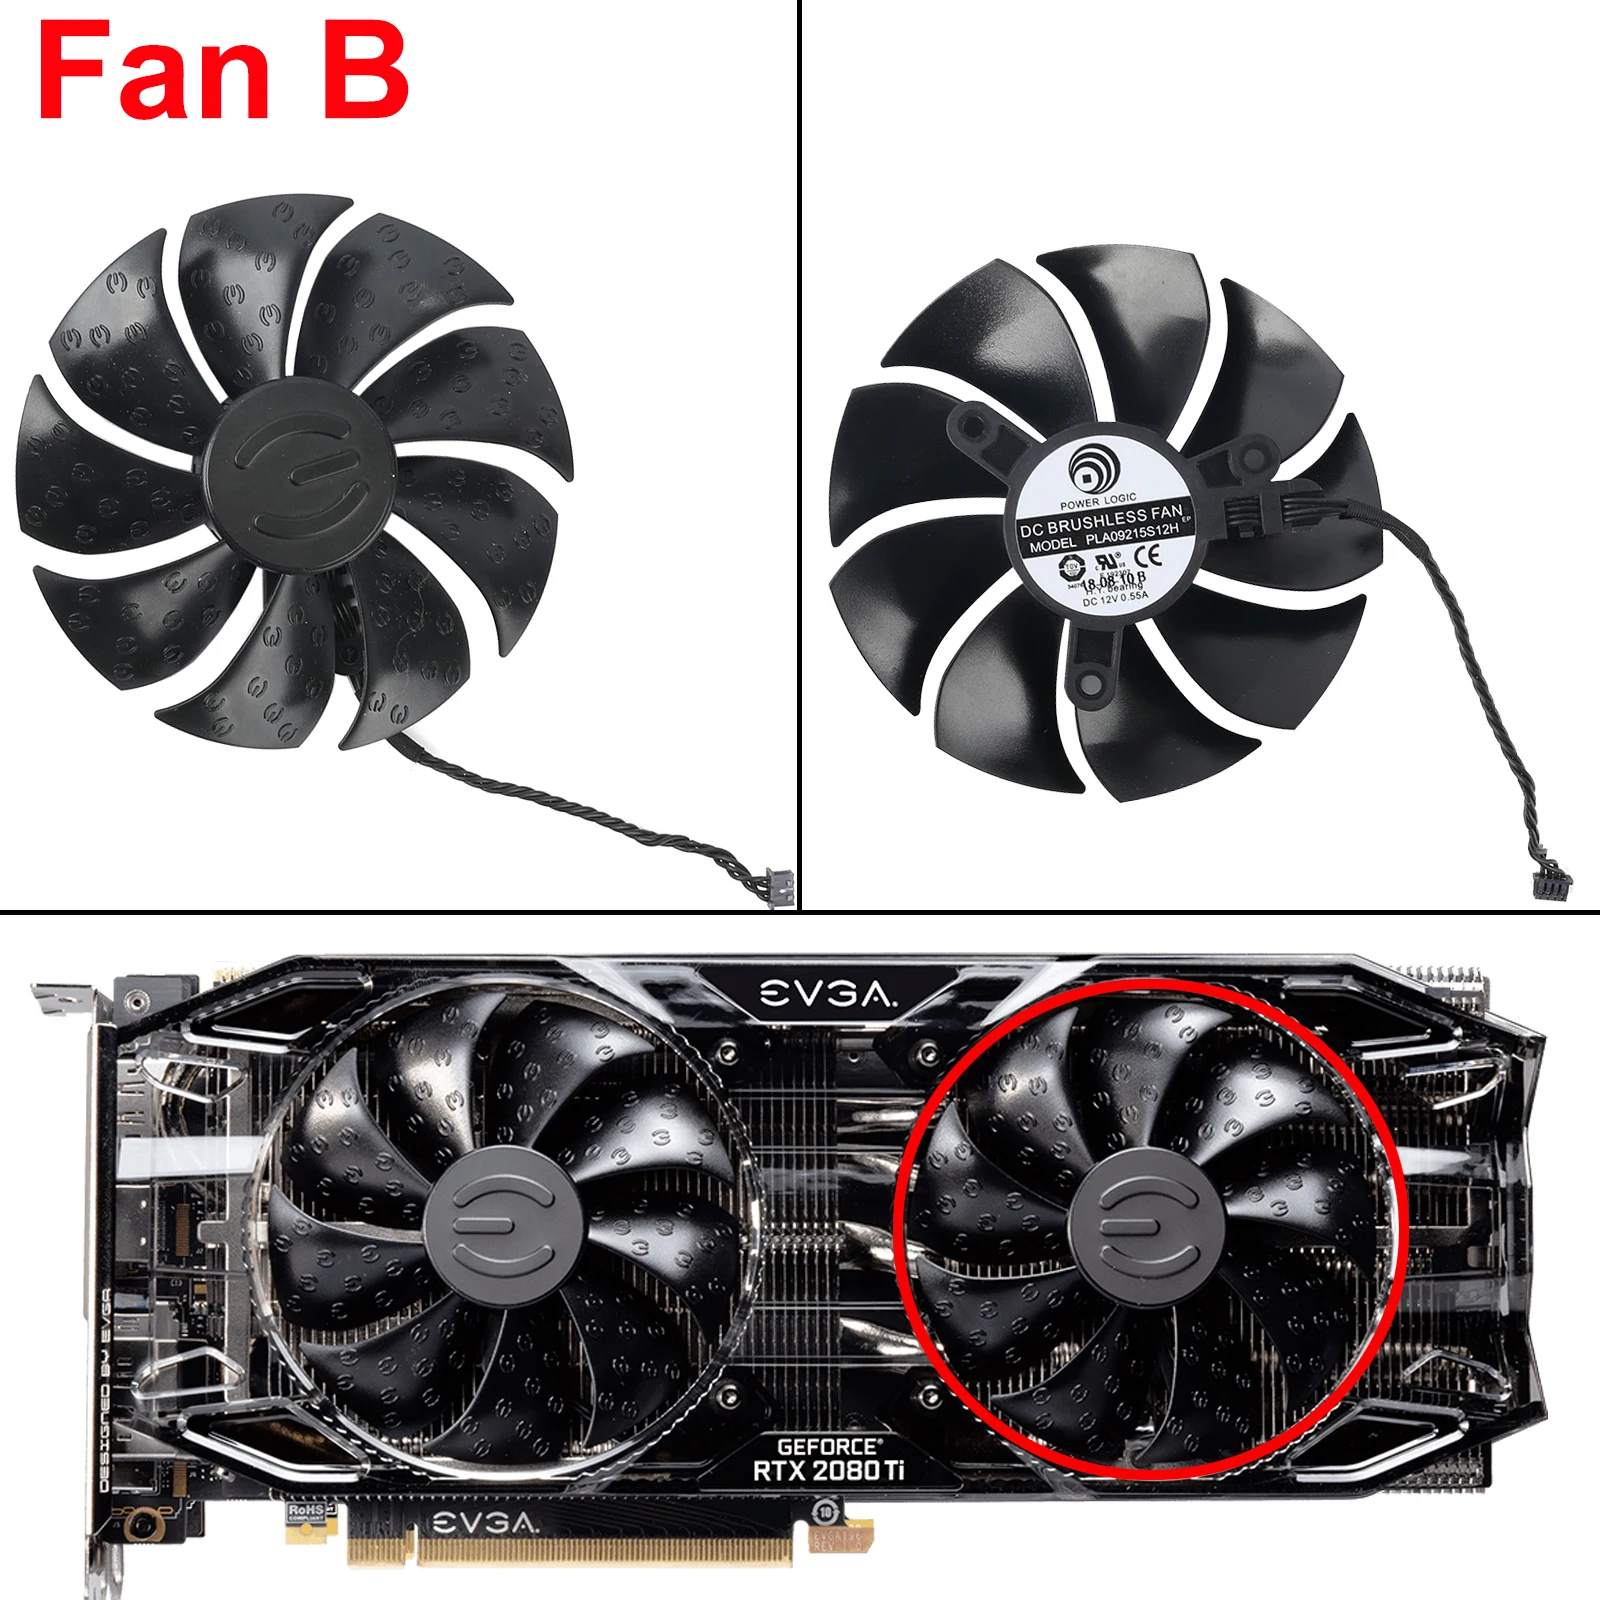 New 87mm Pla09215s12h Cooler Fan Replacement For Evga Rtx 2080 2080ti 2080s Super Xc Ultra Graphics Video Card Cooling Fans - Fans & - AliExpress